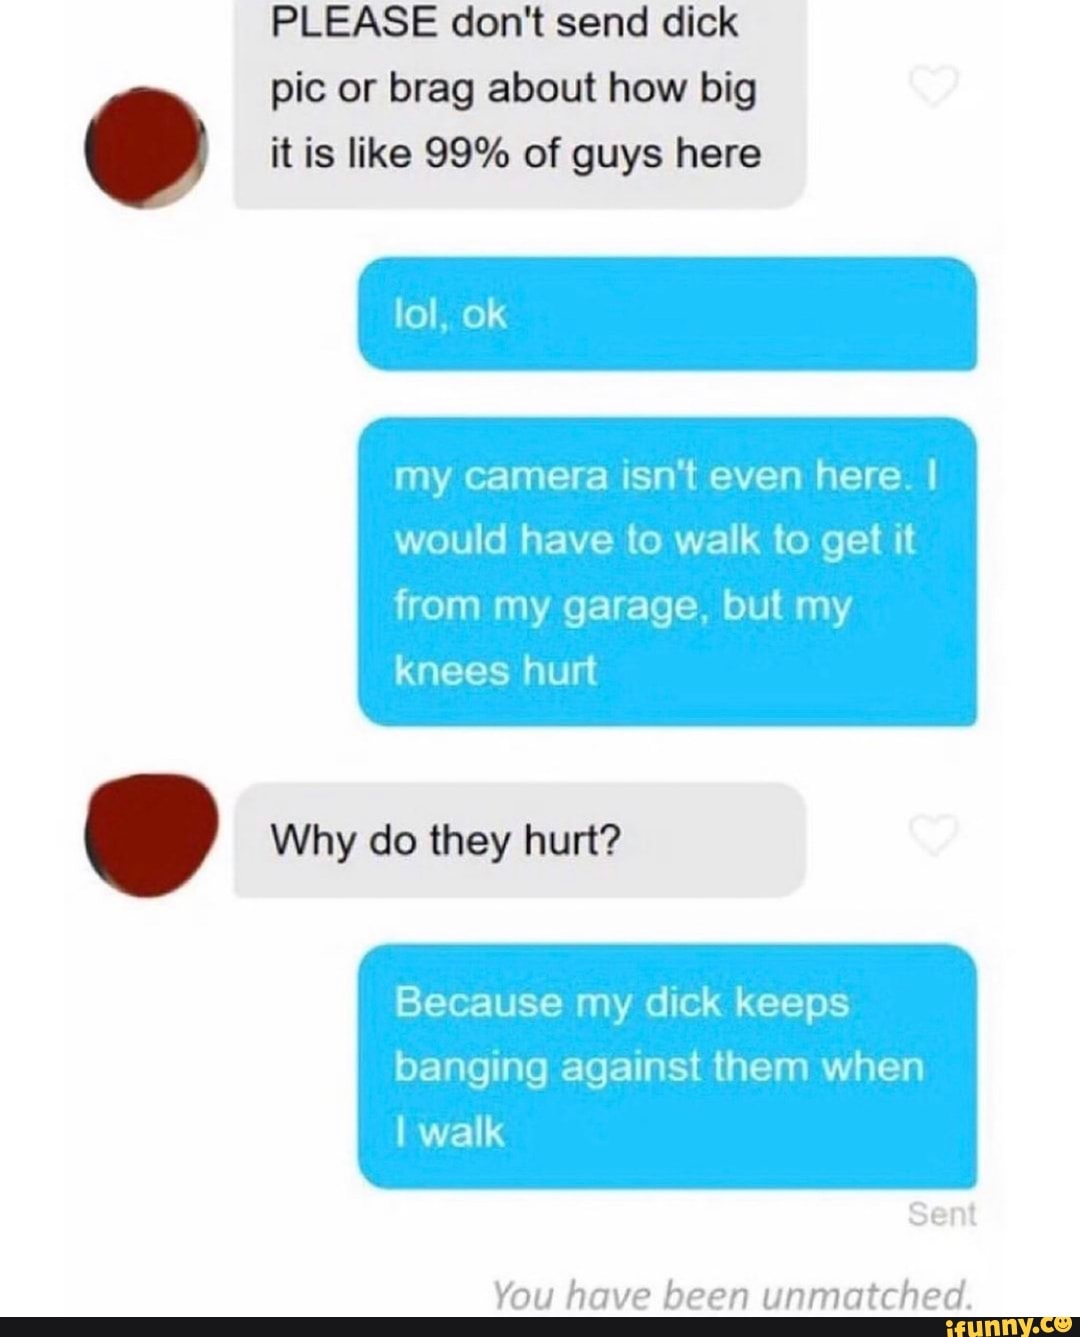 Safe place to send dick pics